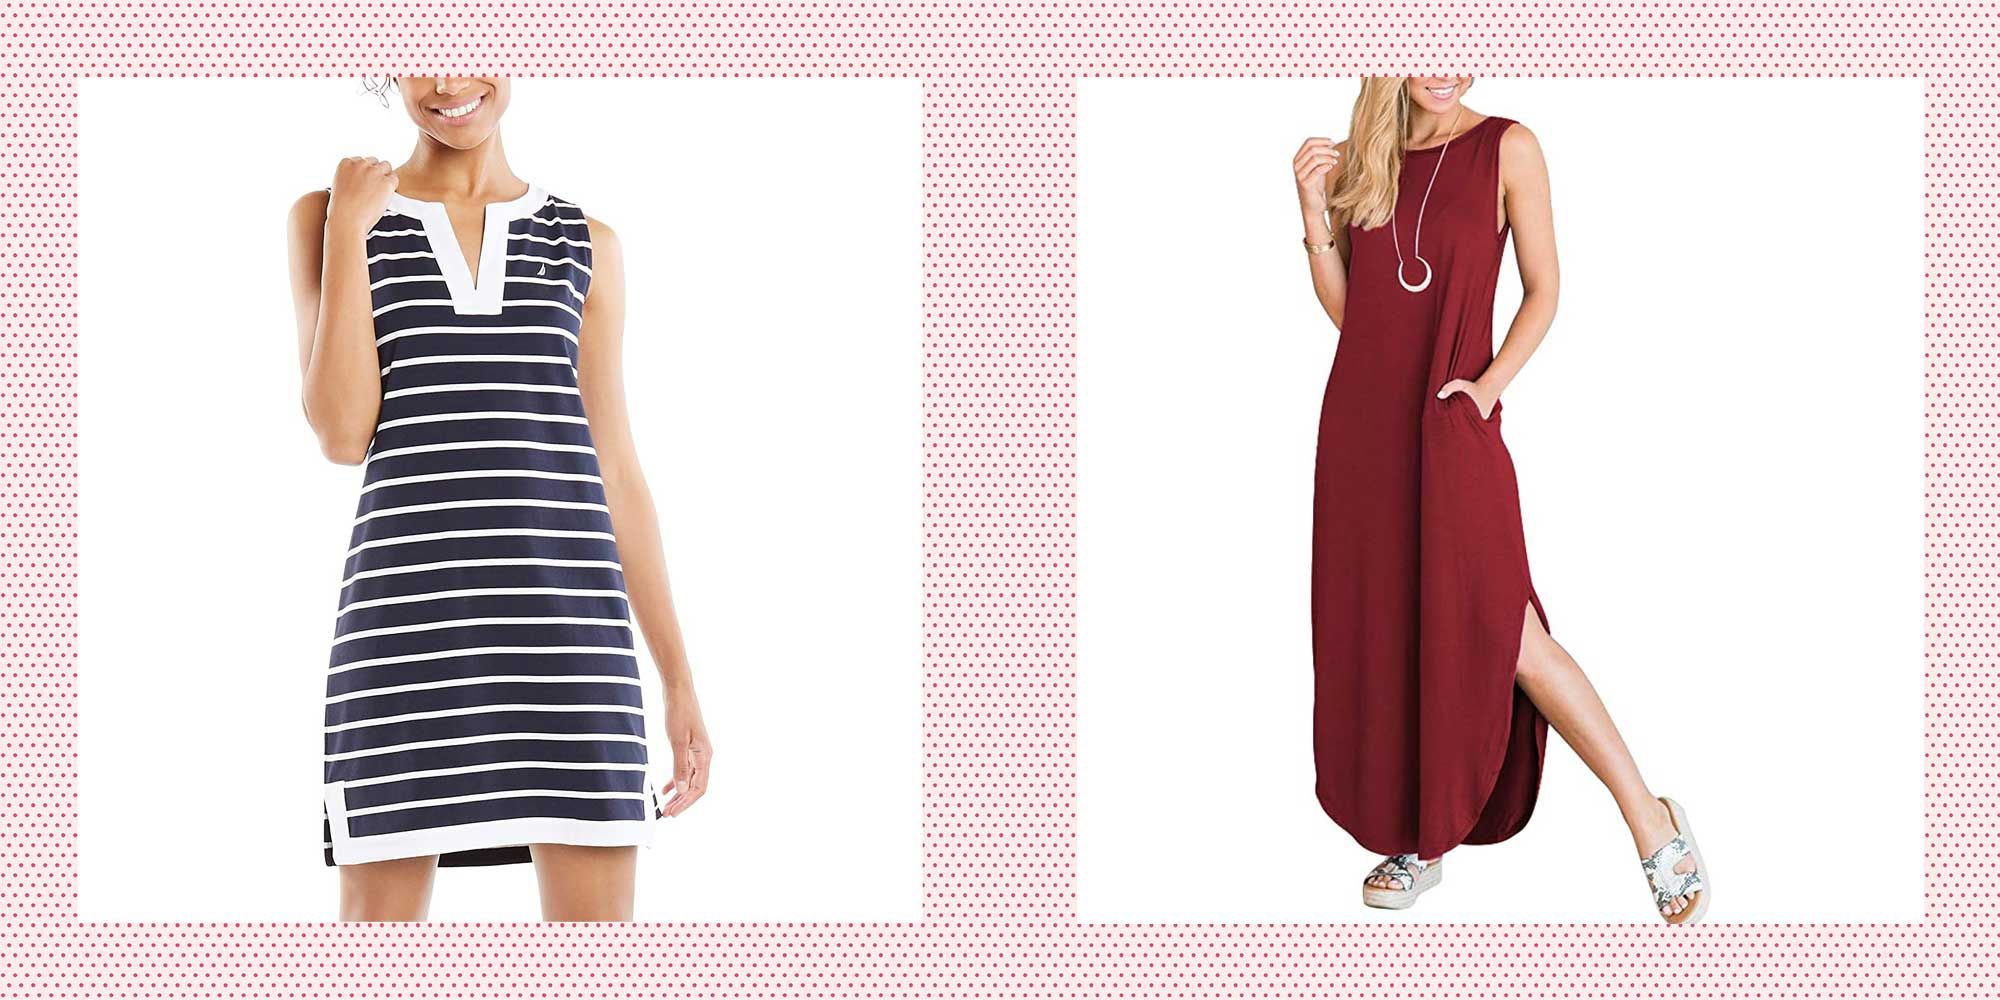 Our Reversible Dresses, ideal for holidays and casual wear